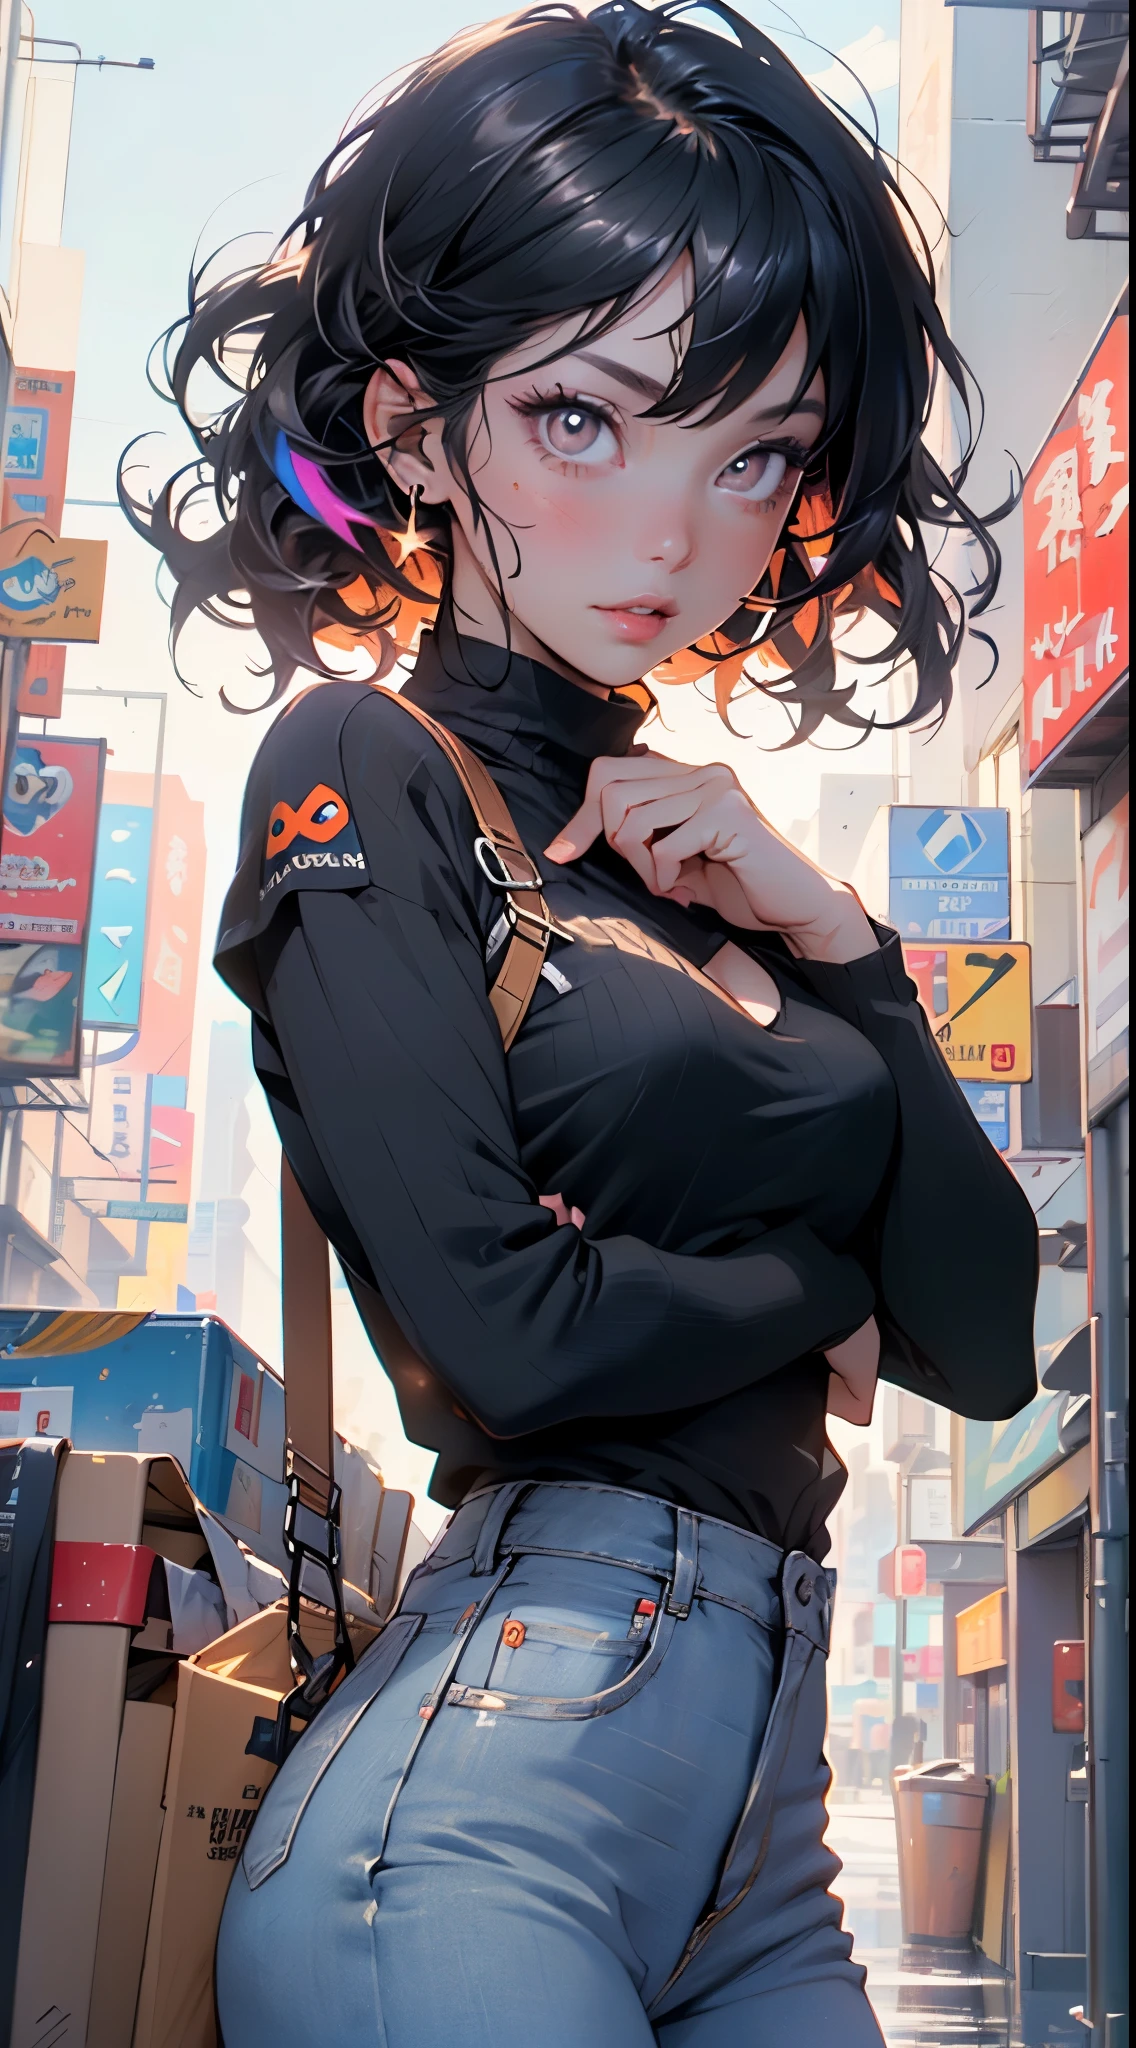 girl spacepunk,(((1girl))),((extremely cute and beautiful black curly-haired anime girl walking down the street)),

(short breasts:1.4),(((black curly hair:1.35,very curly hair,colored inner hair,ear breathing))),((brown eyes:1.3,upturned eyes:1.3,perfect eyes,bright pupils,rainbow glows ultra-detailed deep gold brown eyes:1.1,gradient eyes:1,finely detailed beautiful eyes:1,symmetrical eyes:1,big highlight on eyes:1.2)),((fat)),(((lustrous skin:1.5,bright skin: 1.5,skin tanned,shiny skin,very shiny skin,shiny body,plastic glitter skin,exaggerated shiny skin))),delicate detailed fingers,detailed body,detailed arms,human hands,detailed hands,),

cute,

(gray shirt with an orange squid print,blue denim pants),(intricate outfit,intricate clothes),

(dynamic pose:1.0),solo focus,embarrassed,centered,scale to fit dimensions,Rule of thirds,

cyberpunk city by the ocean at night, with bright neon signs and dark stormy clouds and puddles, scenery:1.25,nighttime, starry night, cosmos,Very dark night that makes the neon lights stand out, very bright neon lights,

artistic photography,(photography taken by sldr),highres, sharp focus,(ultra detailed, extremely detailed), (photorealistic artwork:1.37),(extremely detailed CG unity 8k wallpaper),((synthwave background theme)),(((vibrant colors))),intricate,(intricate background),(masterpiece),(best quality),perfect rendered face,perfect face details,realistic face,photo realistic,analog style,((intricate detail)),(((realism))),